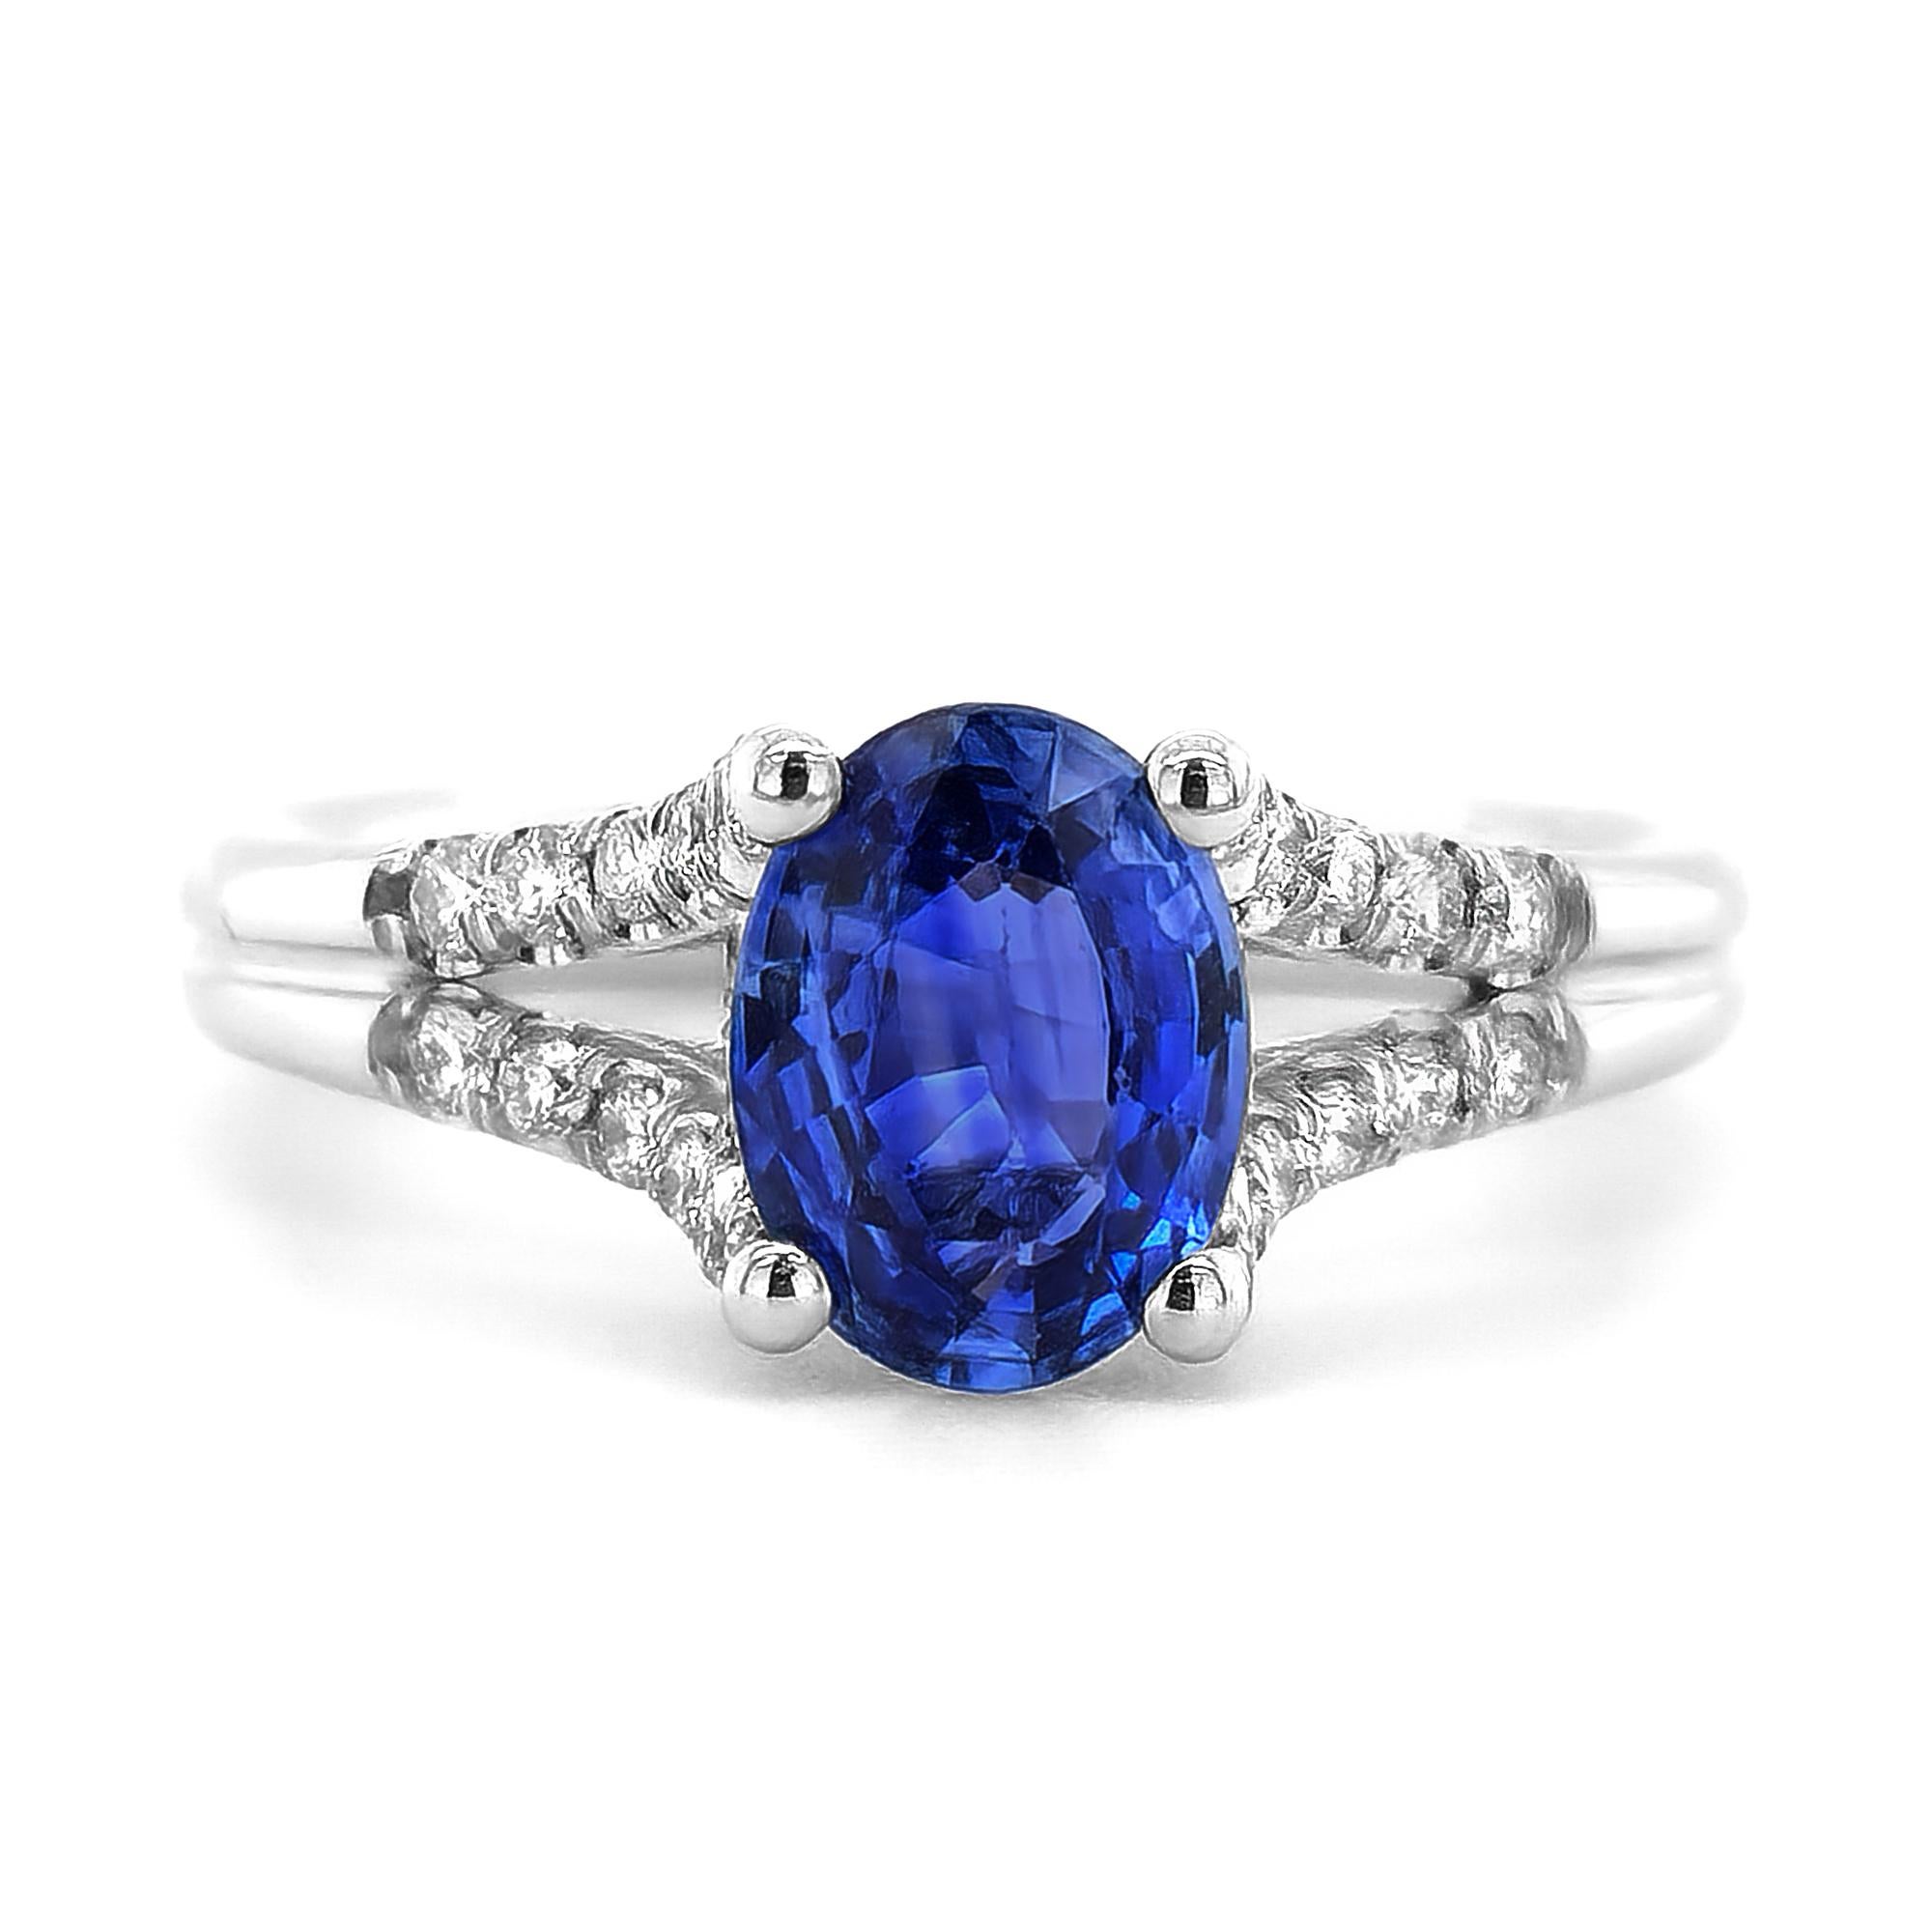 This ring is a true gem, featuring a 1.33 carat heated Sapphire with a captivating cornflower blue hue at its center. The 14K white gold setting adds a touch of luxury, and the diamonds on the shoulders provide extra sparkle and elegance. Its